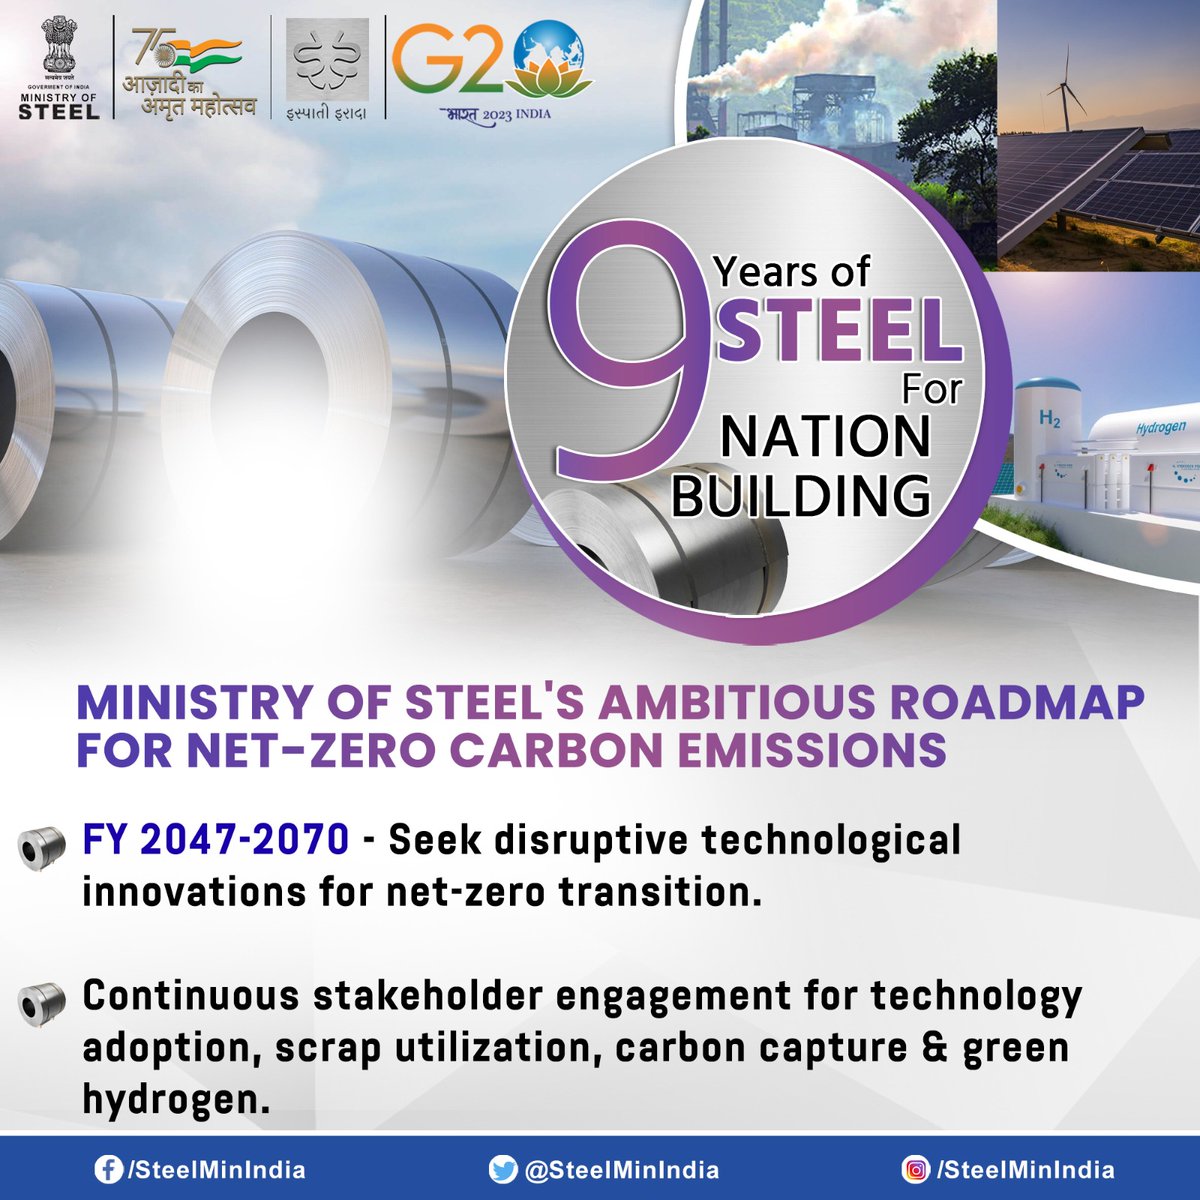 Ministry of Steel's Ambitious Roadmap of #NetZeroEmissions! 🌍💨 

Engaging stakeholders, embracing technology & optimizing resources to shape a #sustainable future for Indian #steel. 

#9YearsOfSeva #9SaalBemisaal #AtmanirbharBharat #ClimateAction